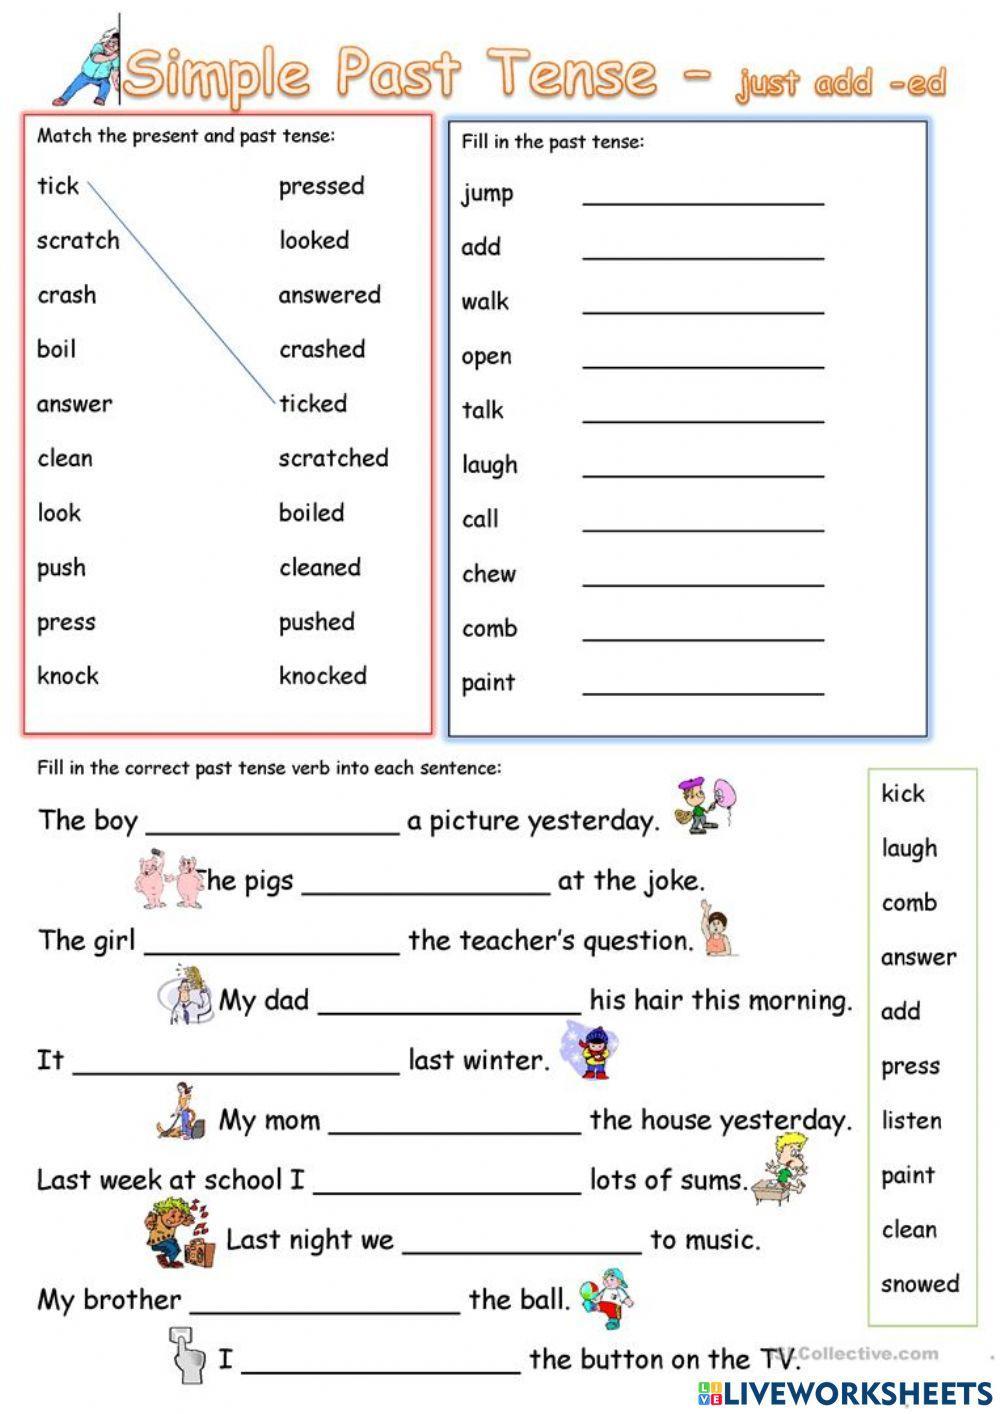 the-simple-past-tense-activity-live-worksheets